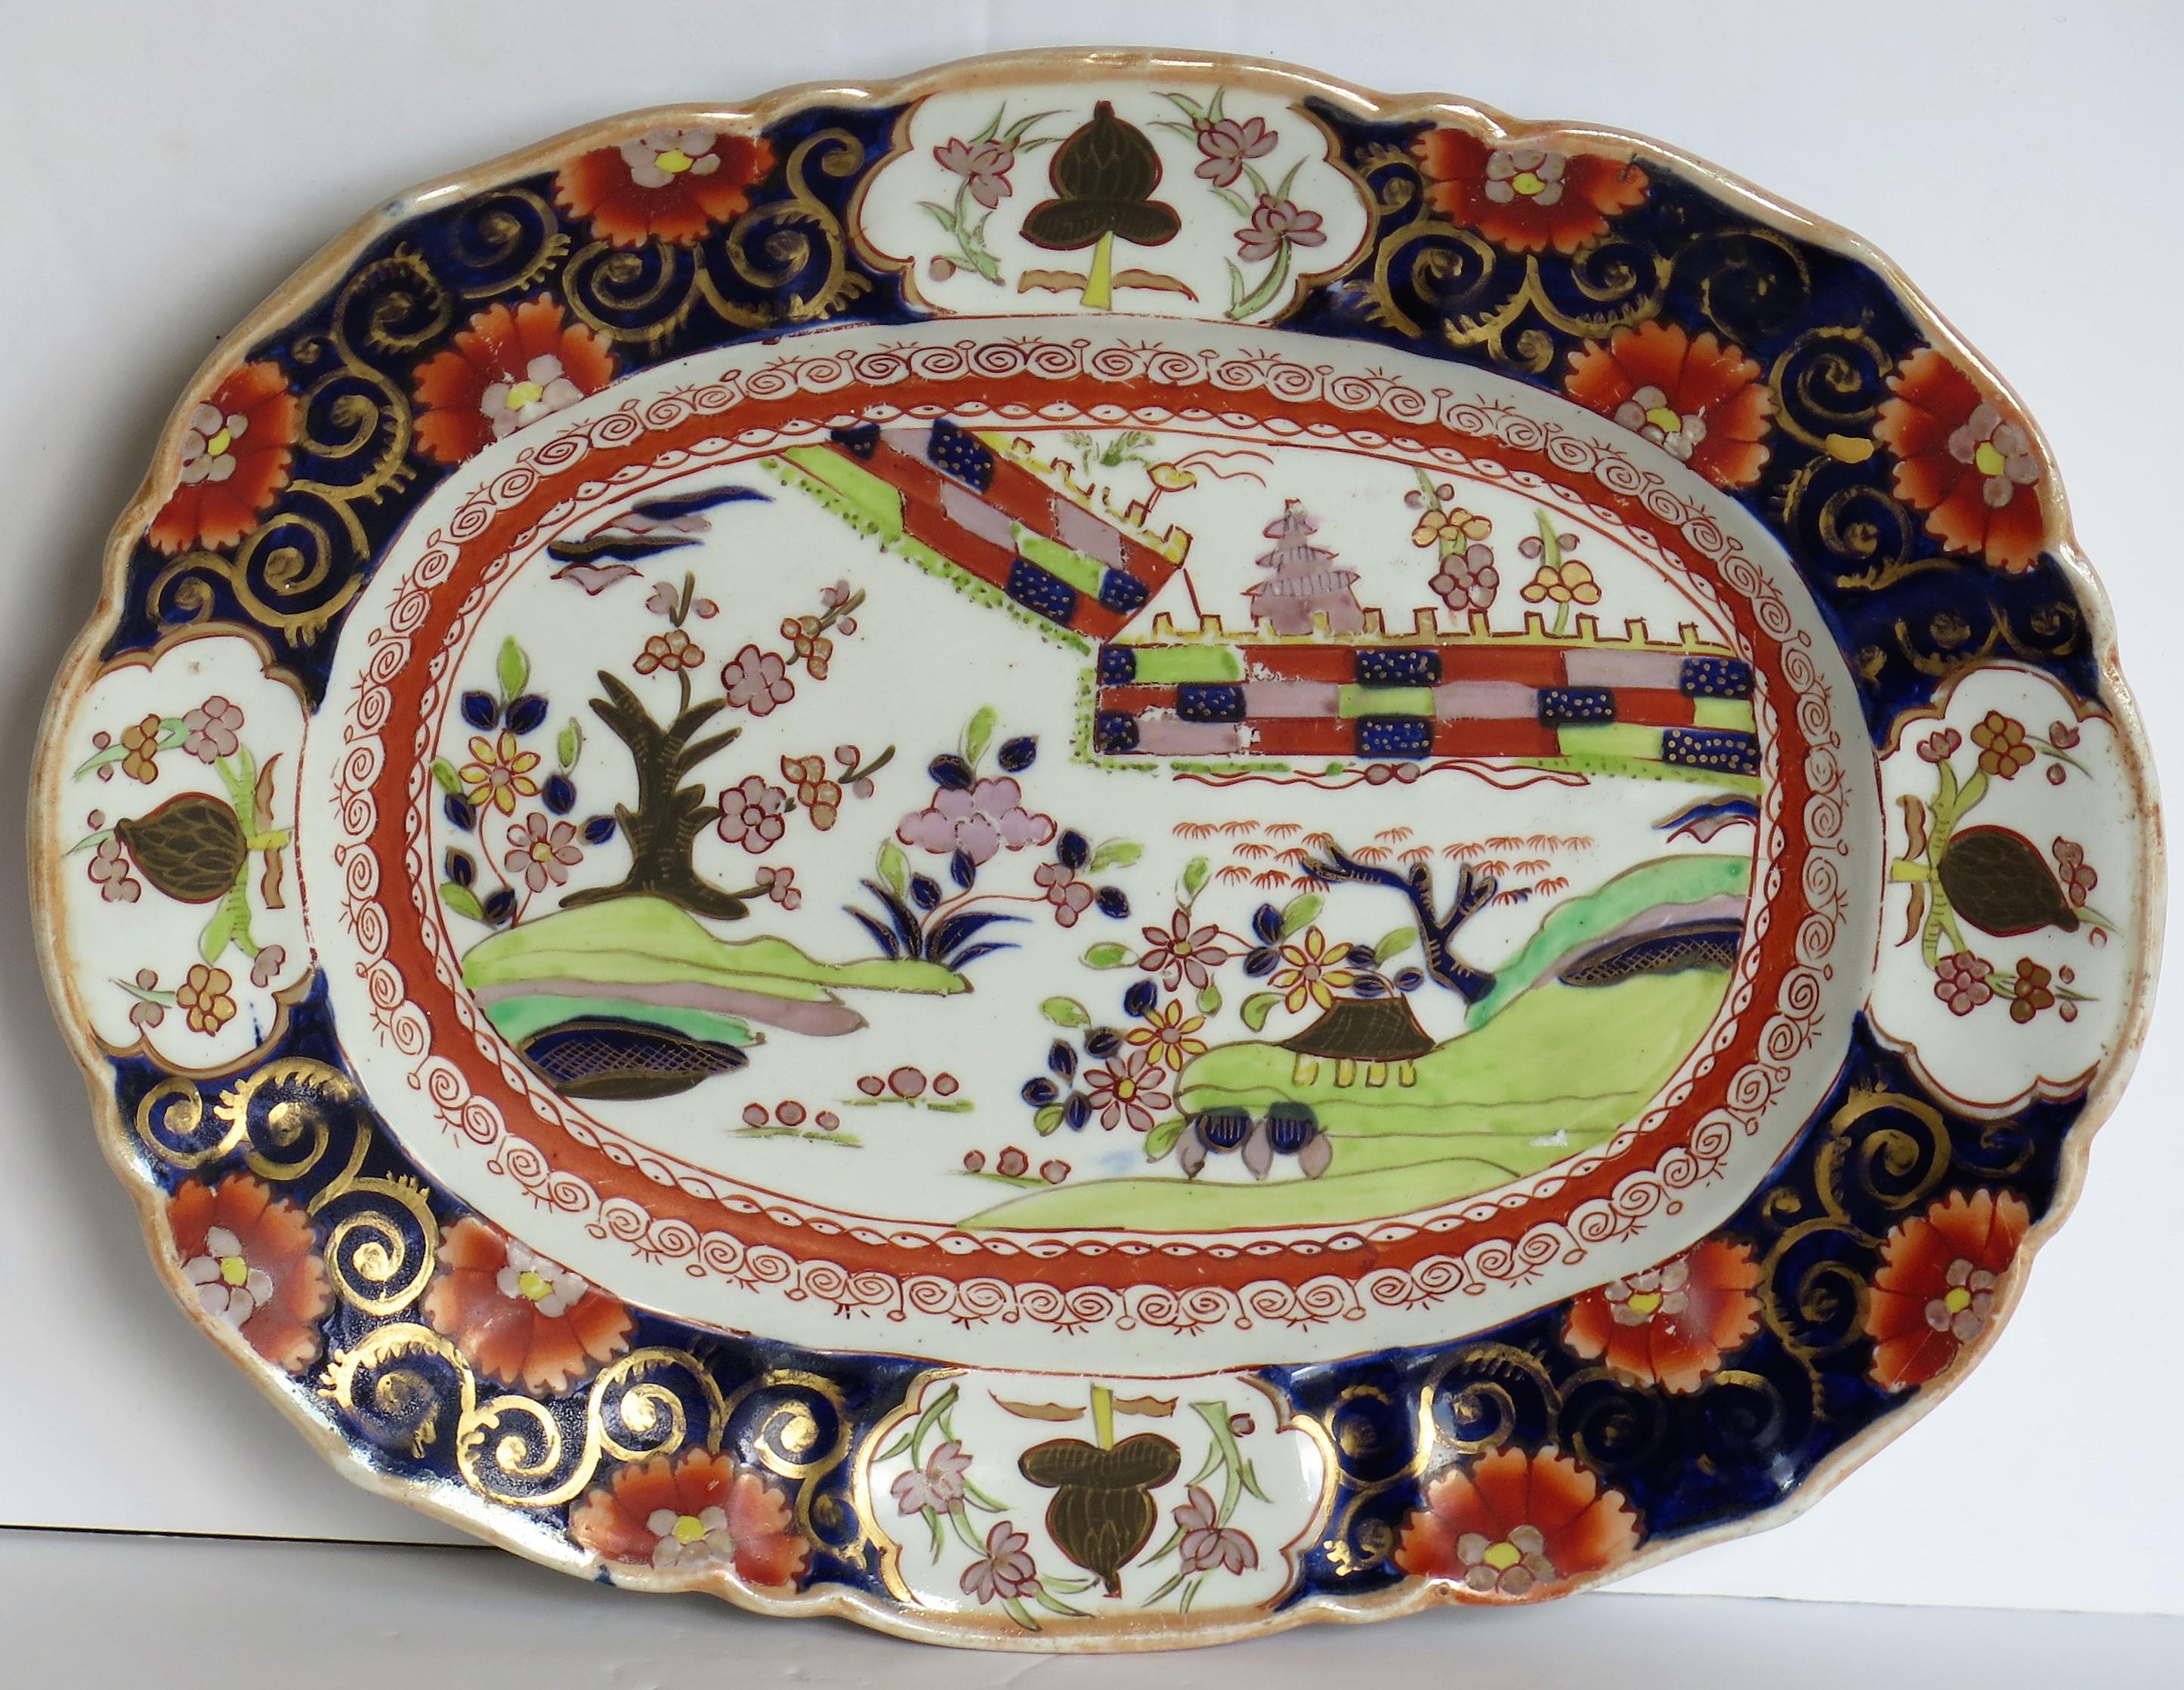 Chinoiserie Early Mason's Ironstone Platter or Plate in Colored Wall Pattern, circa 1825